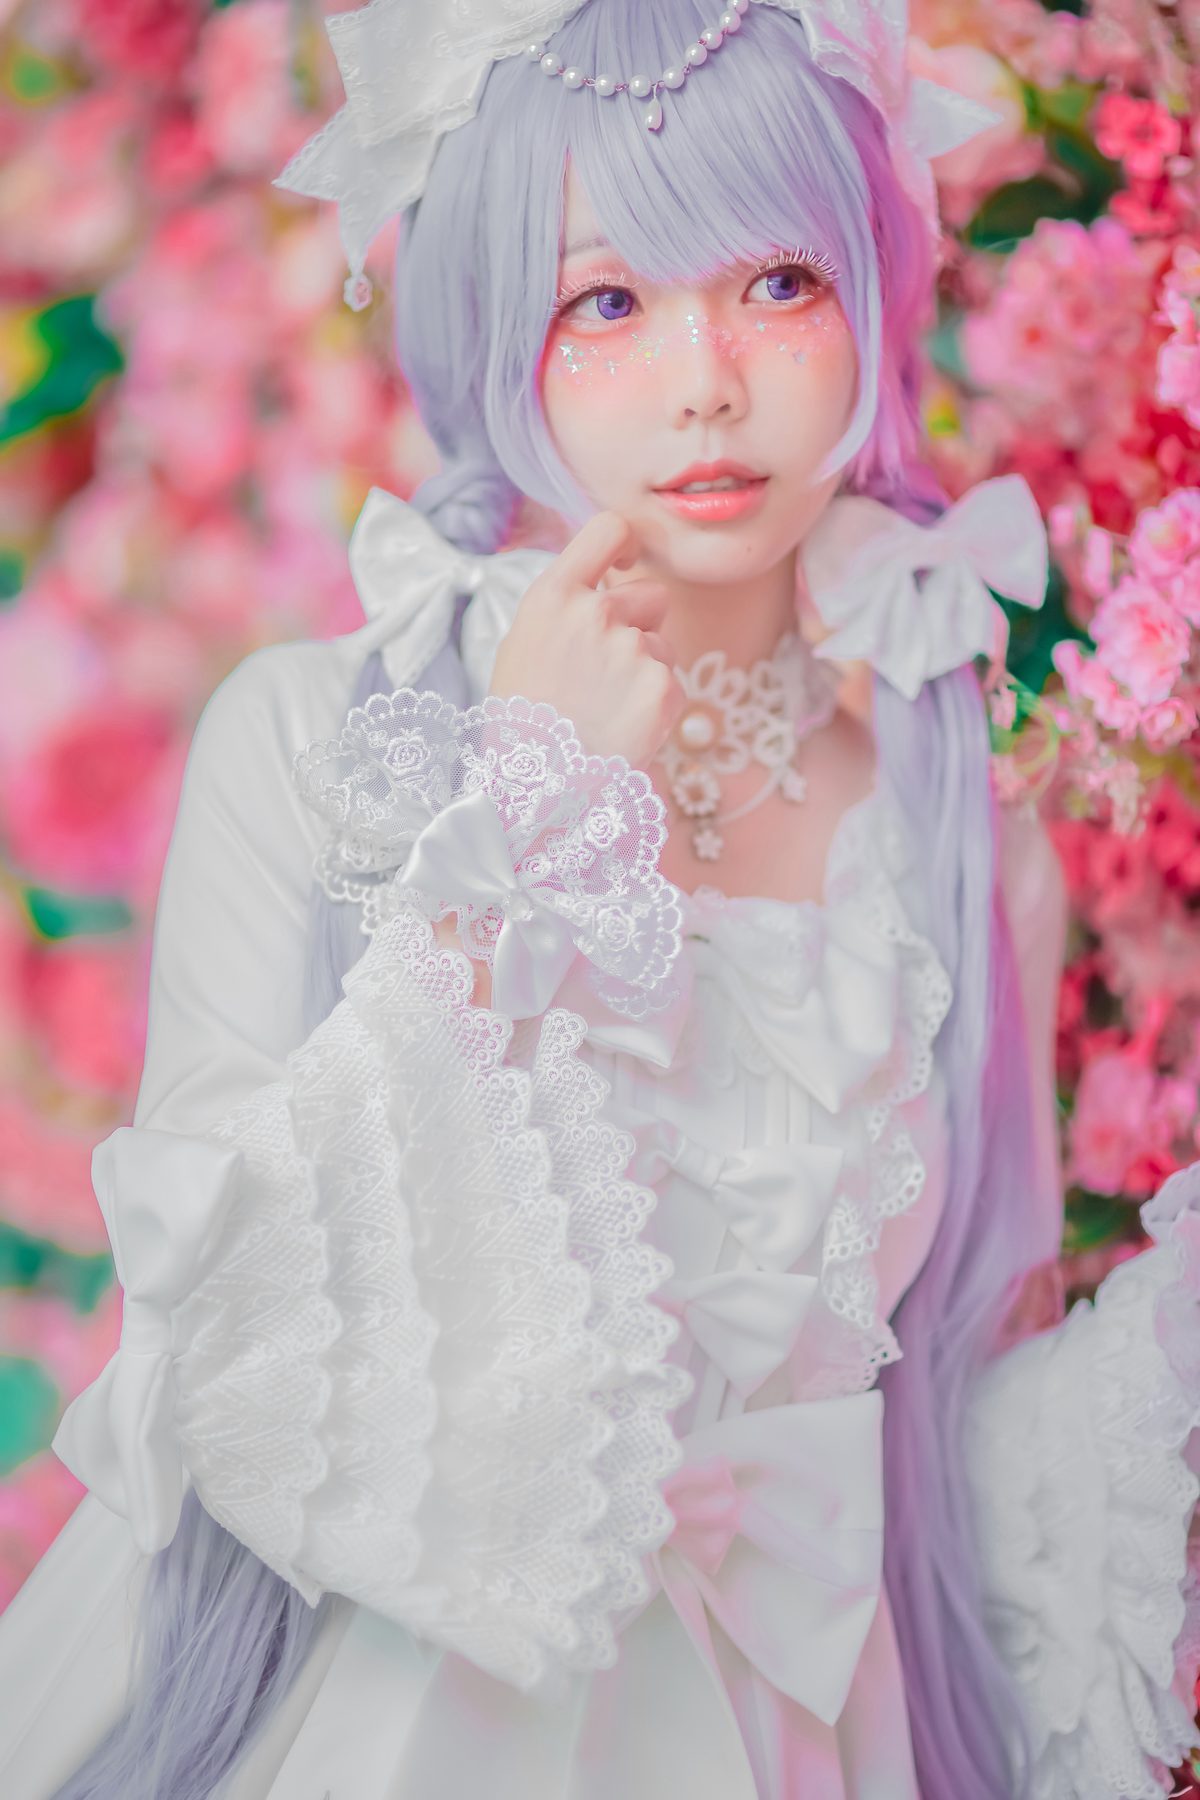 Coser@Ely_eee ElyEE子 TUESDAY TWINTAIL A 0035 0077376658.jpg